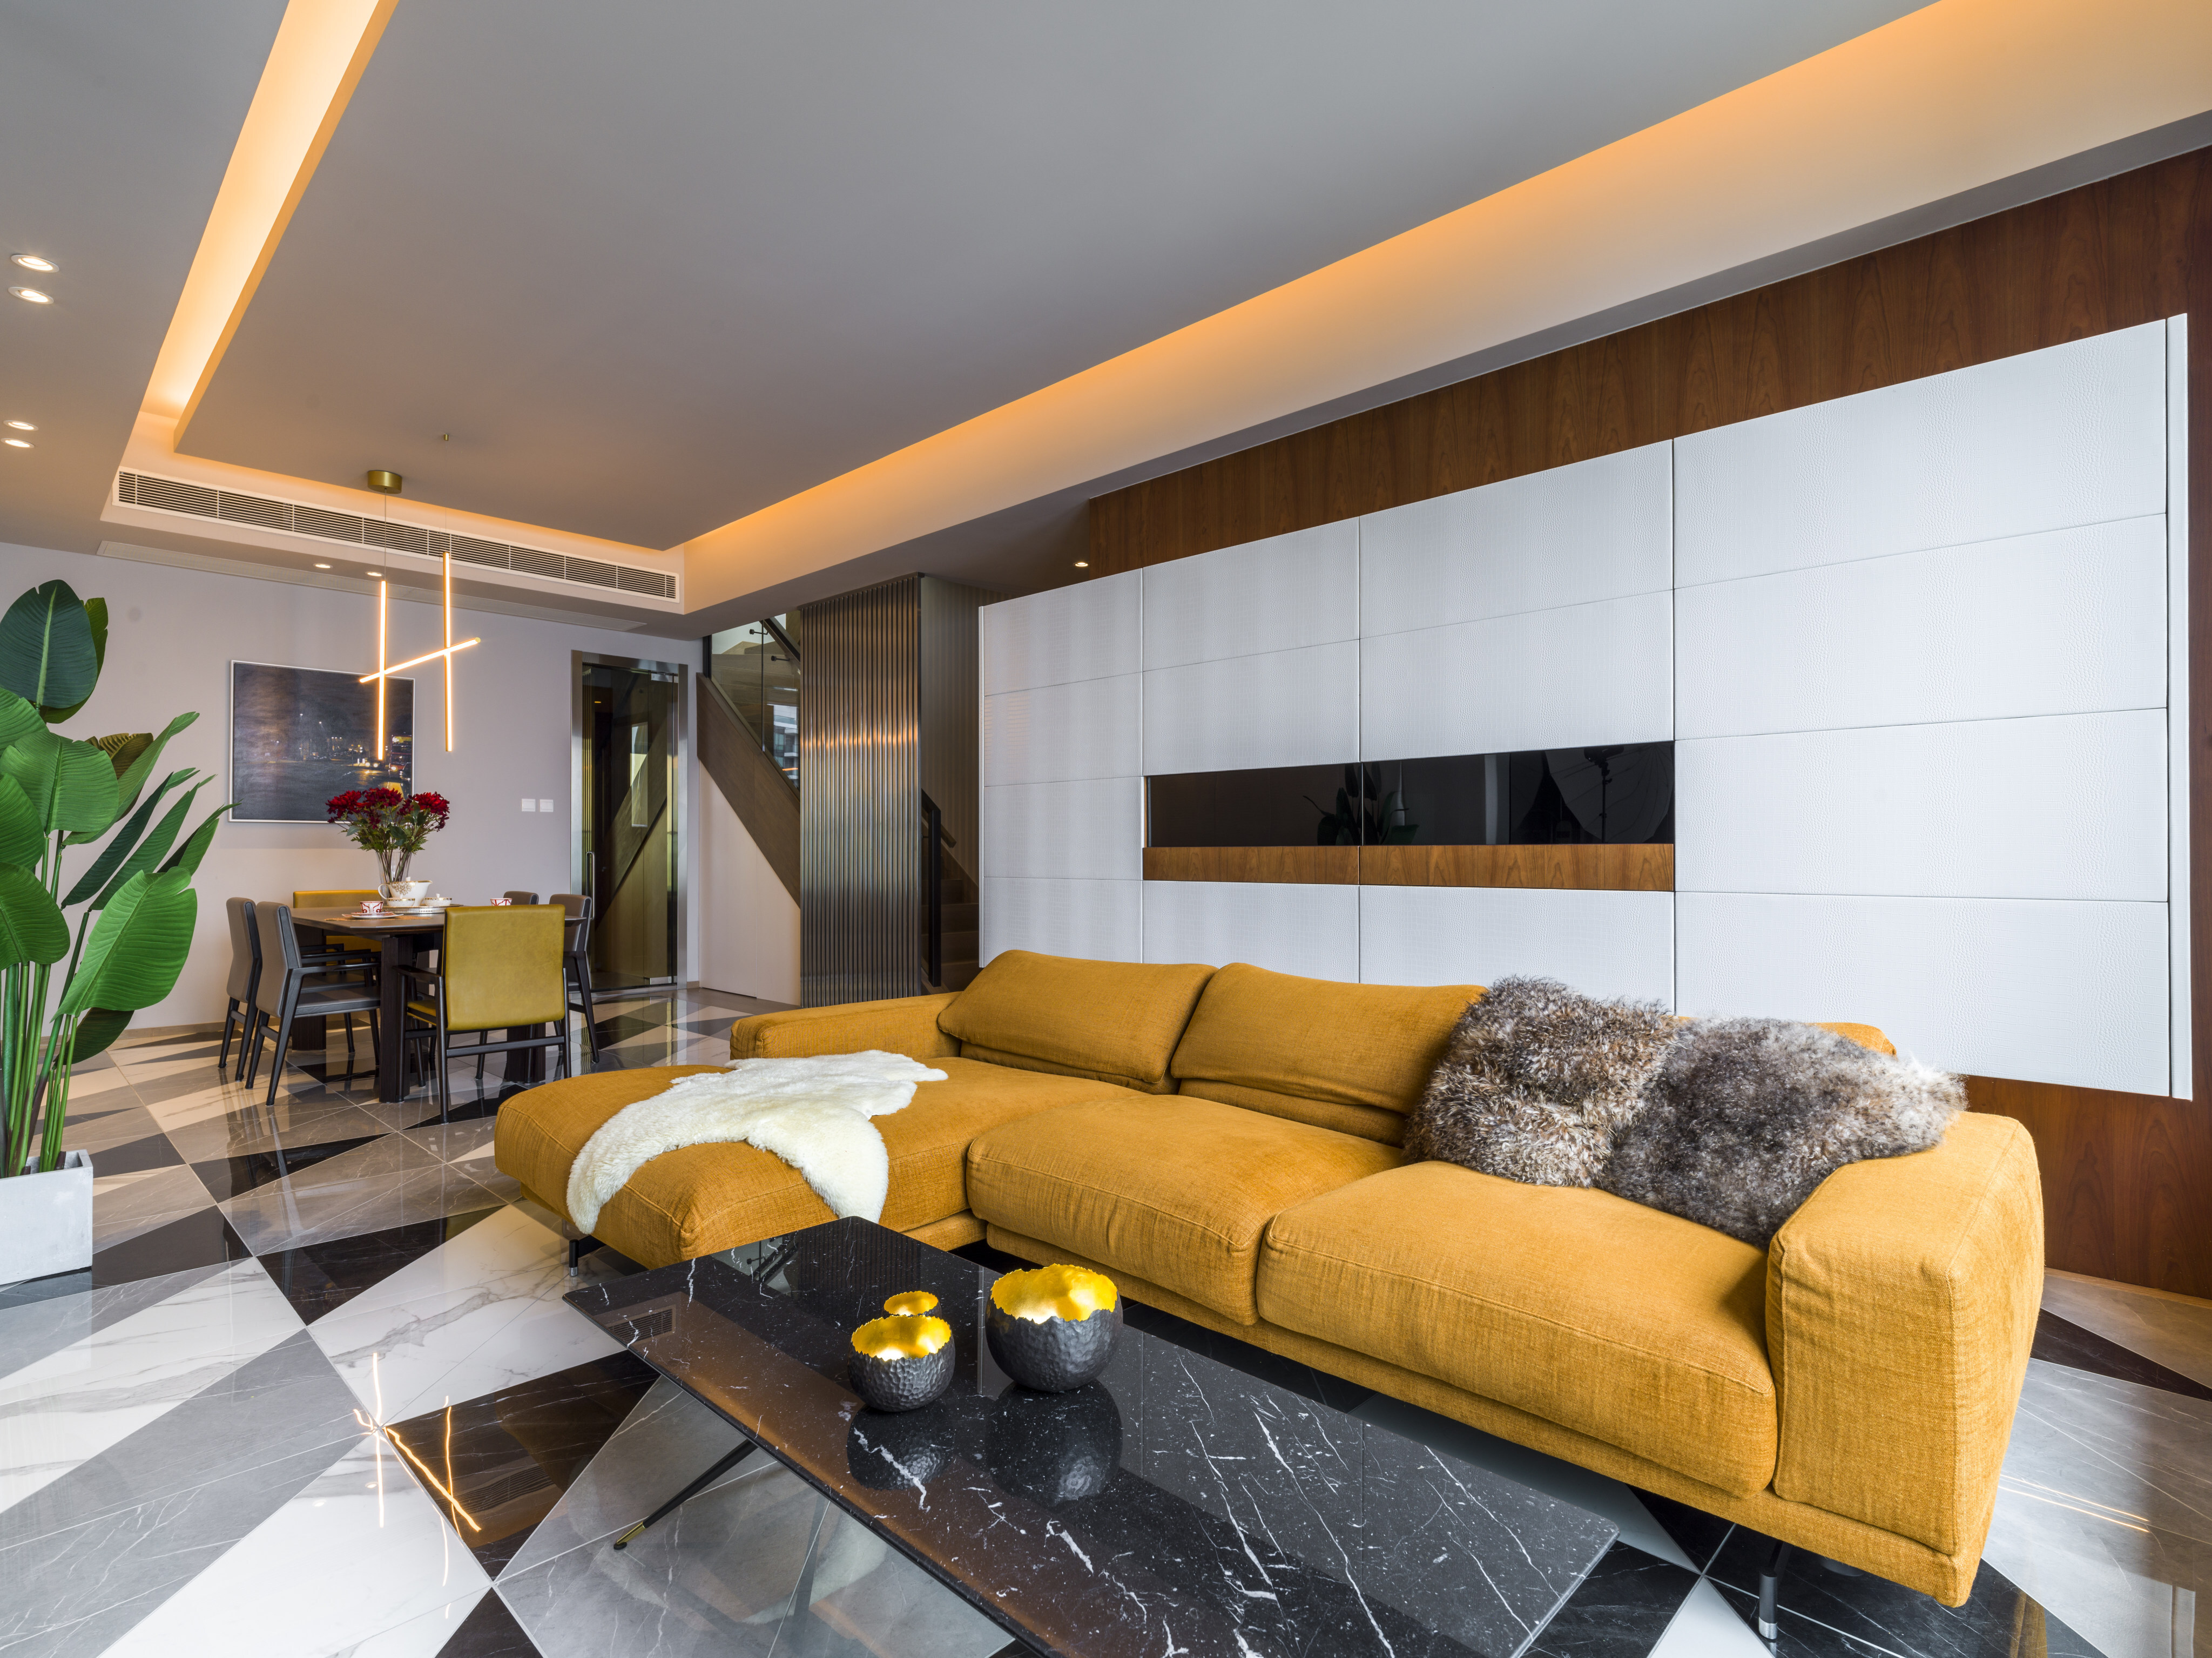 Pal Pang Yu-yan, the founder of Another Design International, helped a Hong Kong family transform their Tseung Kwan O home into “the best home they’ve ever had”. Styling: Flavia Markovits. Photography: John Butlin. Photo assistant: Timothy Tsang